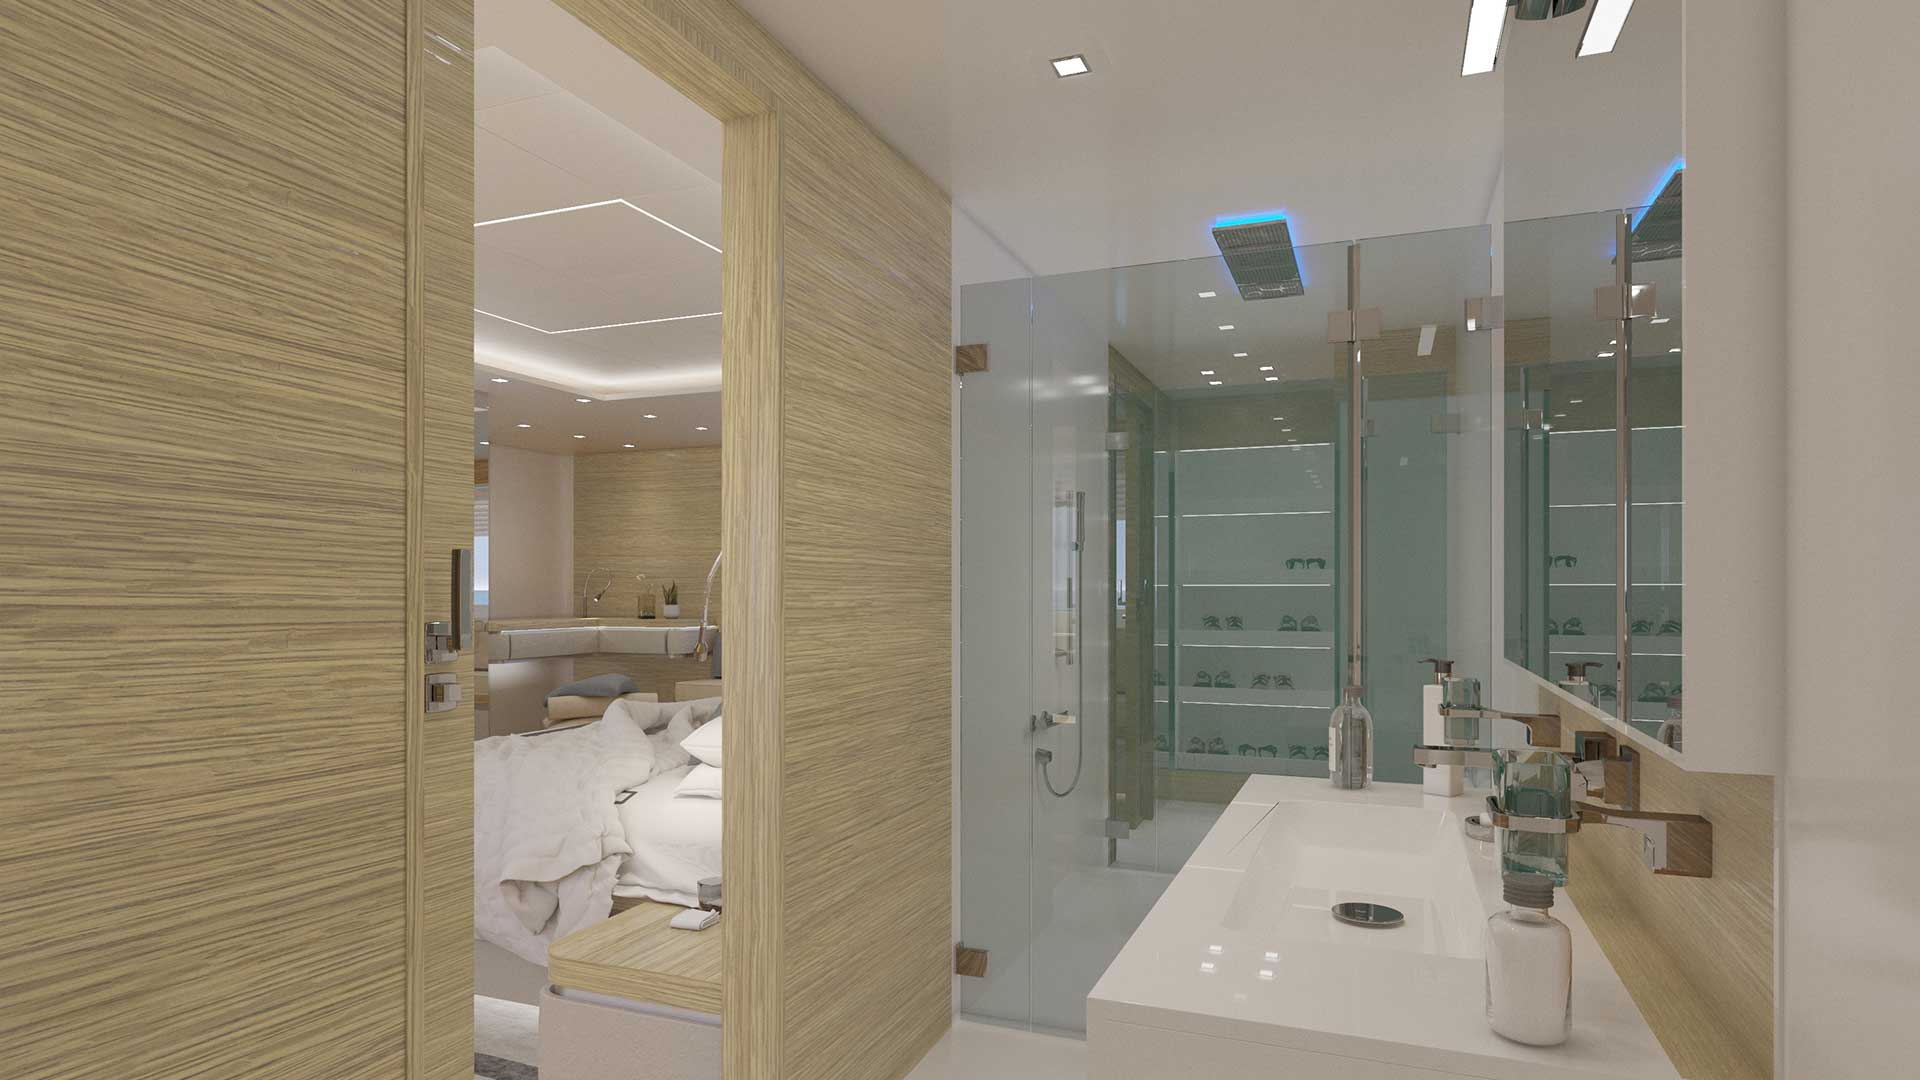 Master ensuite with rain shower and view to closet